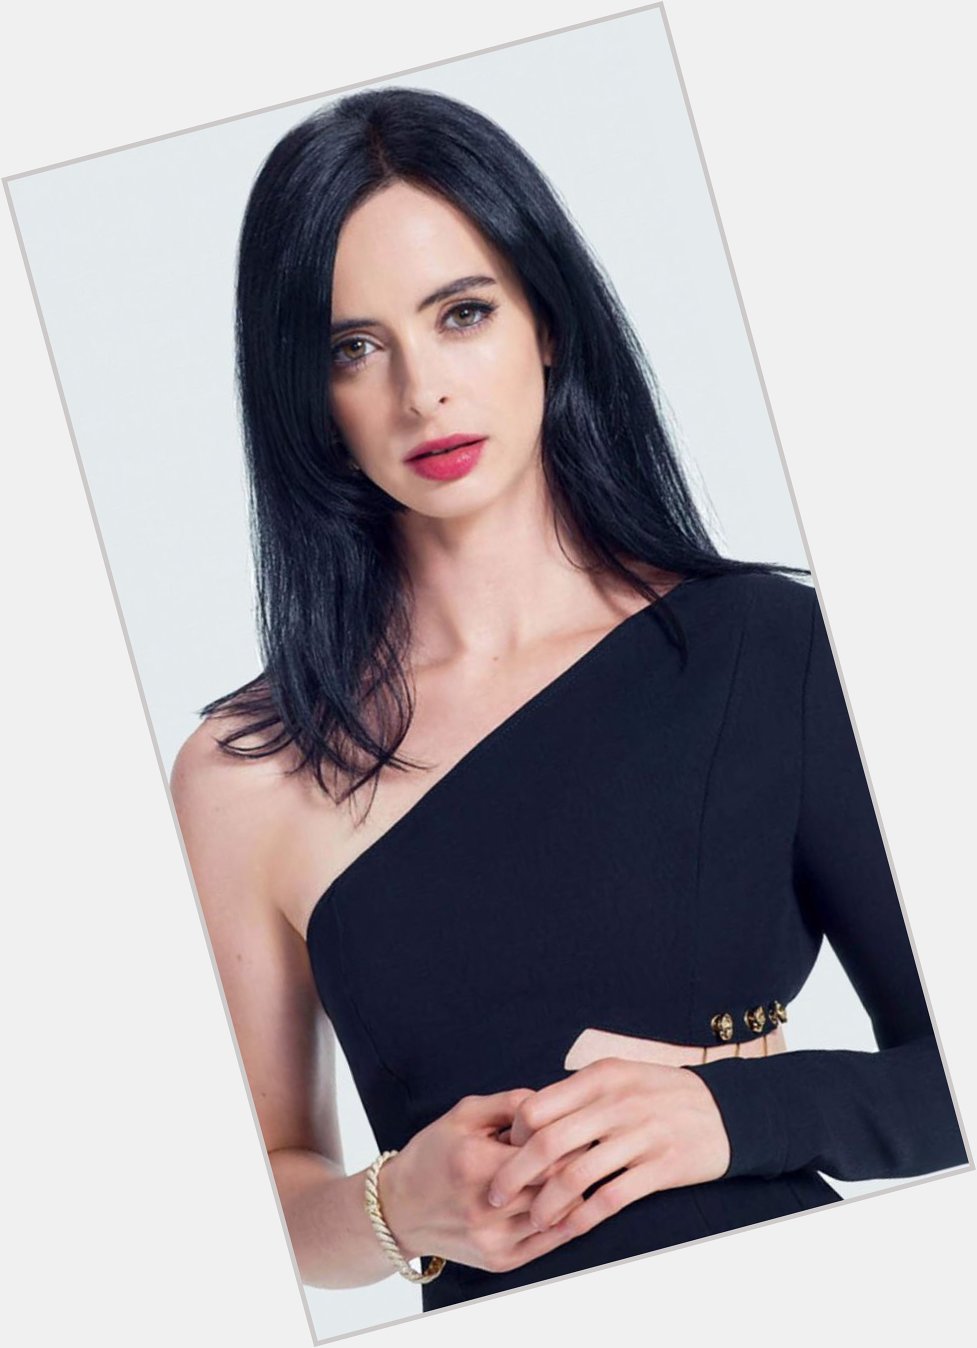 Happy birthday Krysten Ritter.
Our beloved Jessica Jones and Bitch from apartment 23
Love you! 